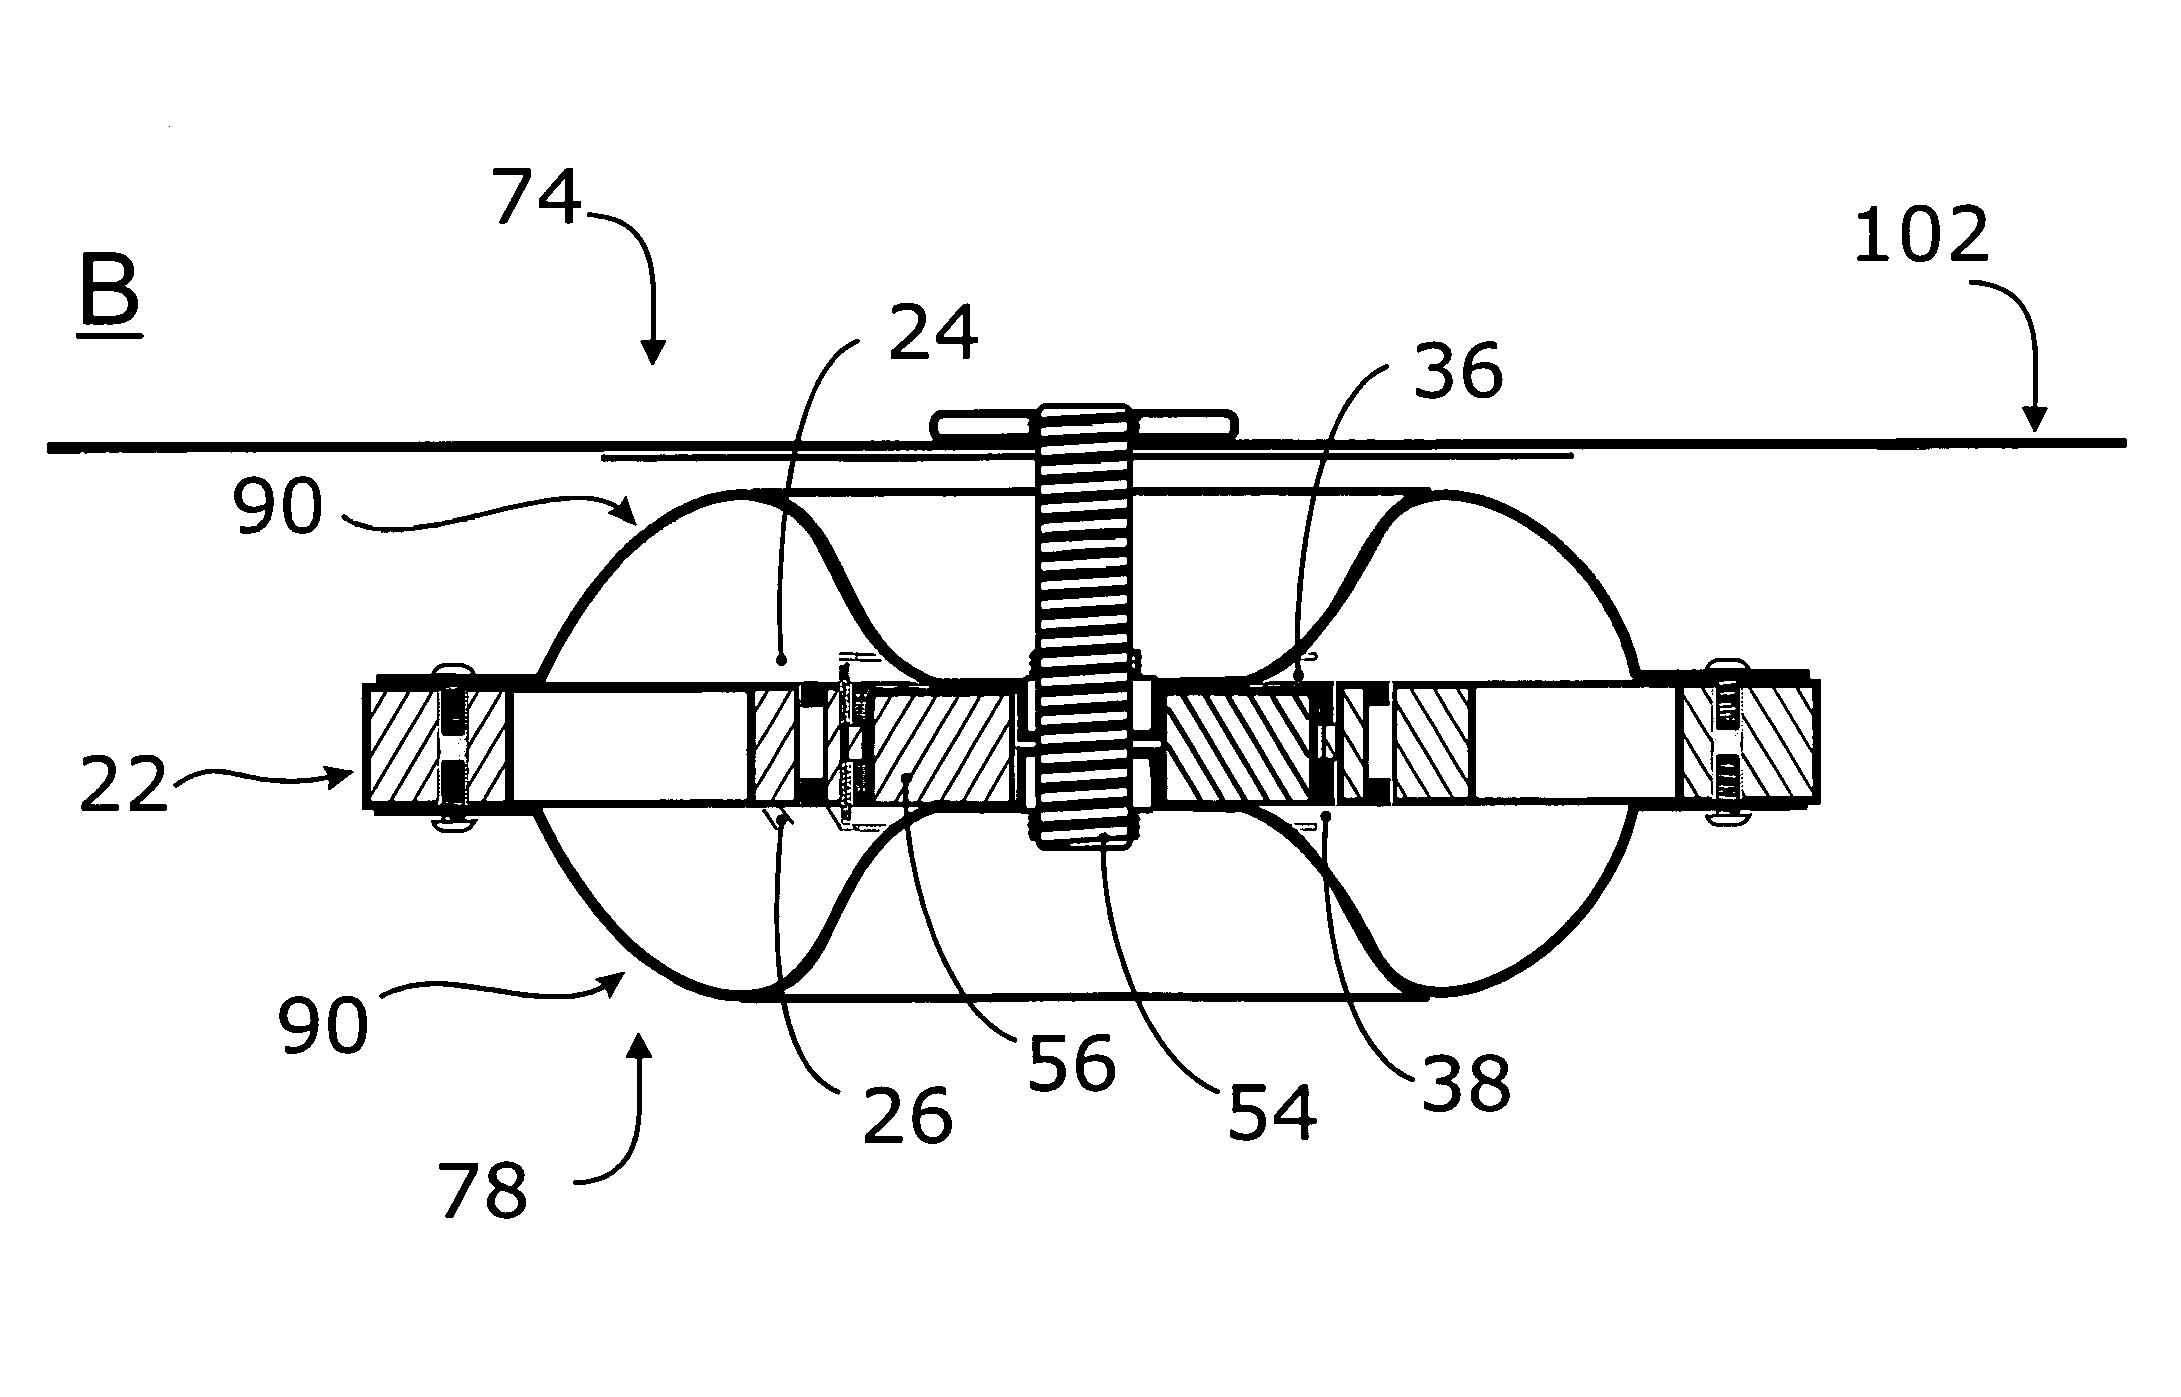 Transducer for tactile applications and apparatus incorporating transducers